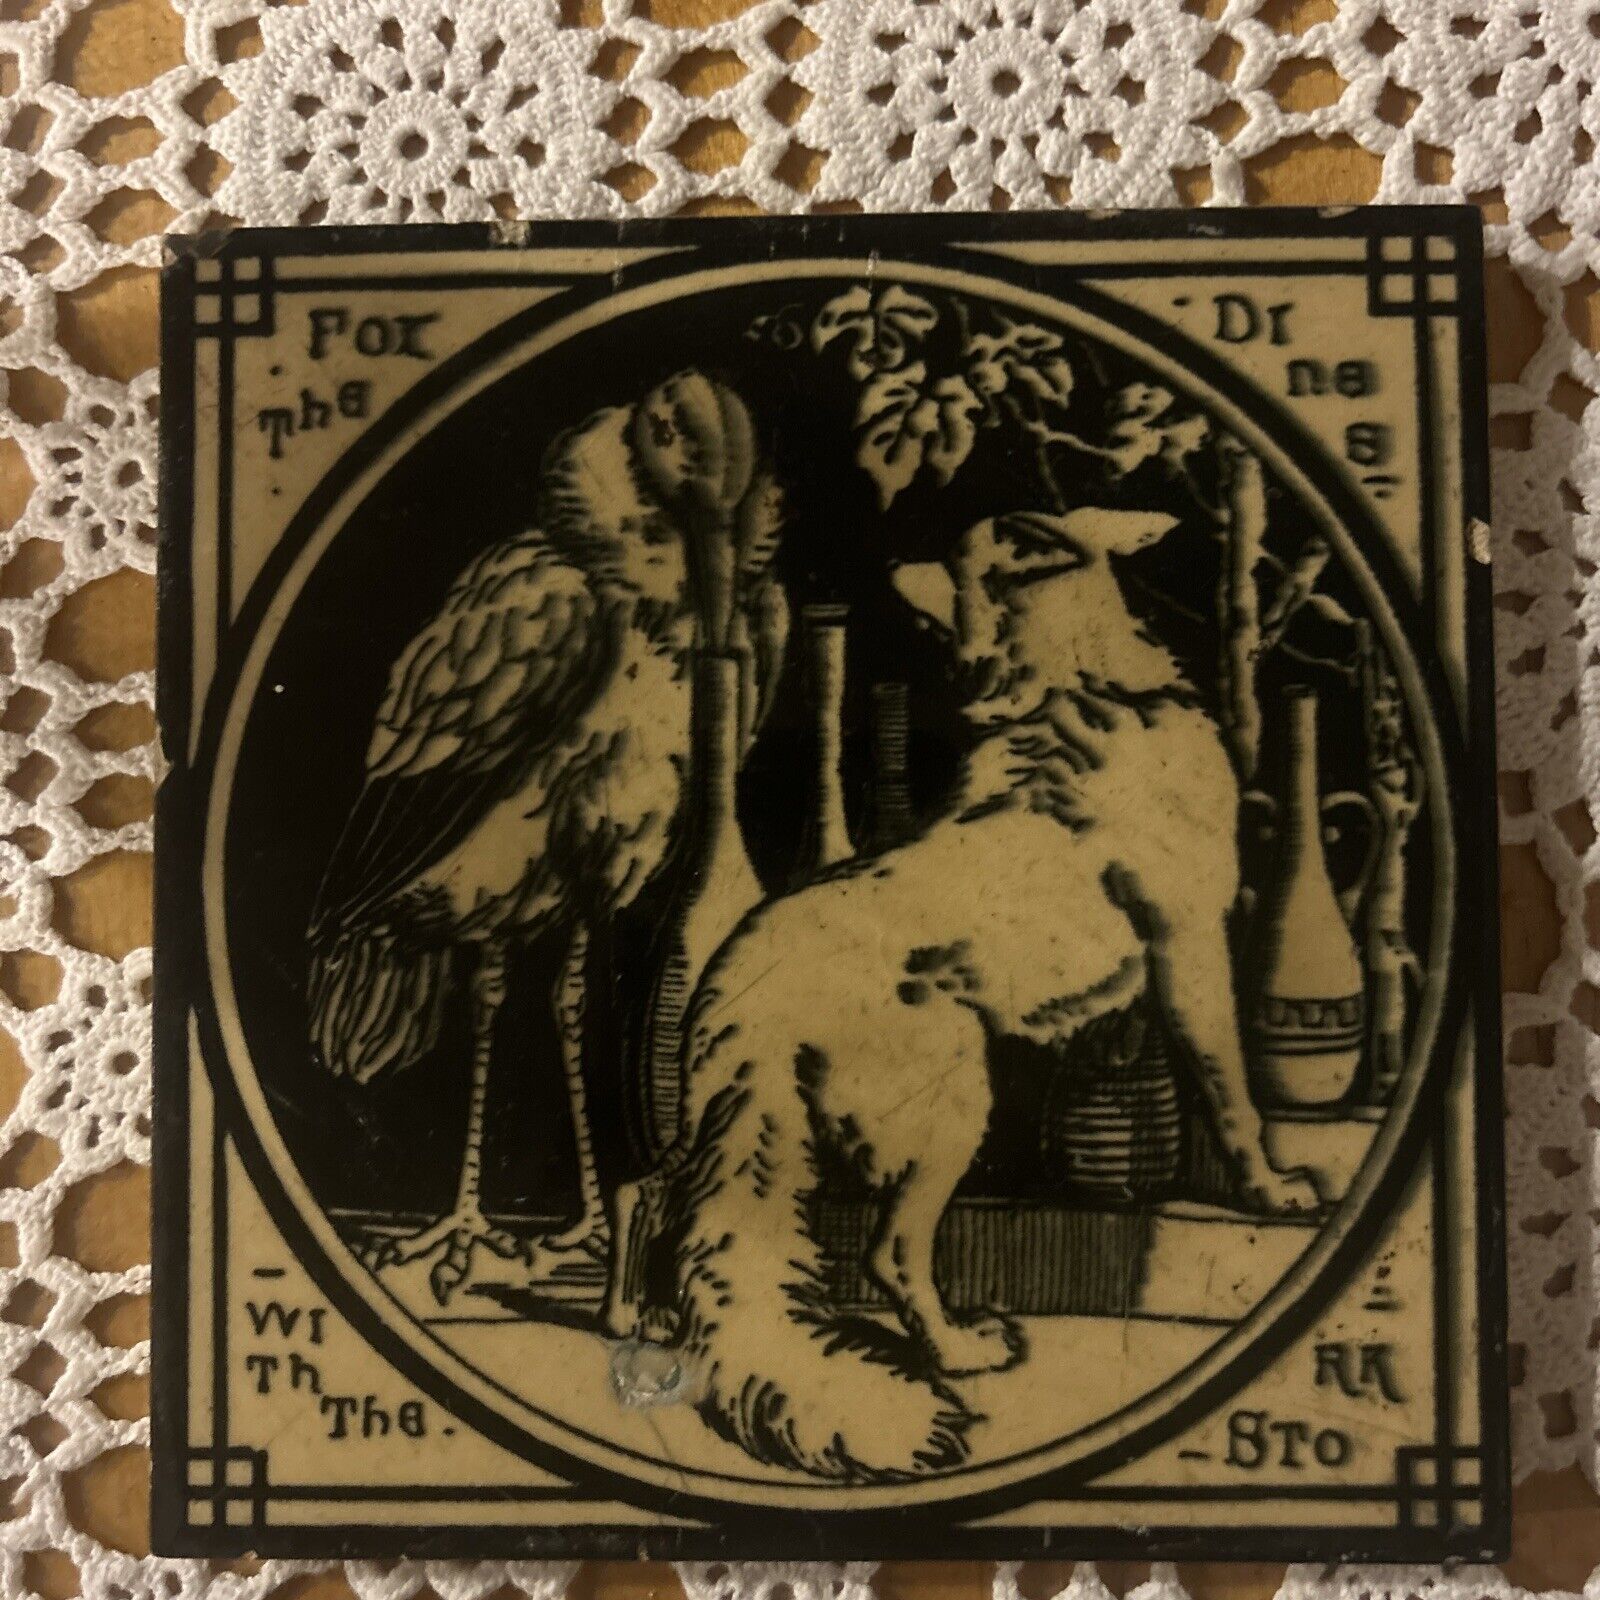 Minton China Works Glaze Printed Tiles Aesop Fables By John Moyr Smith